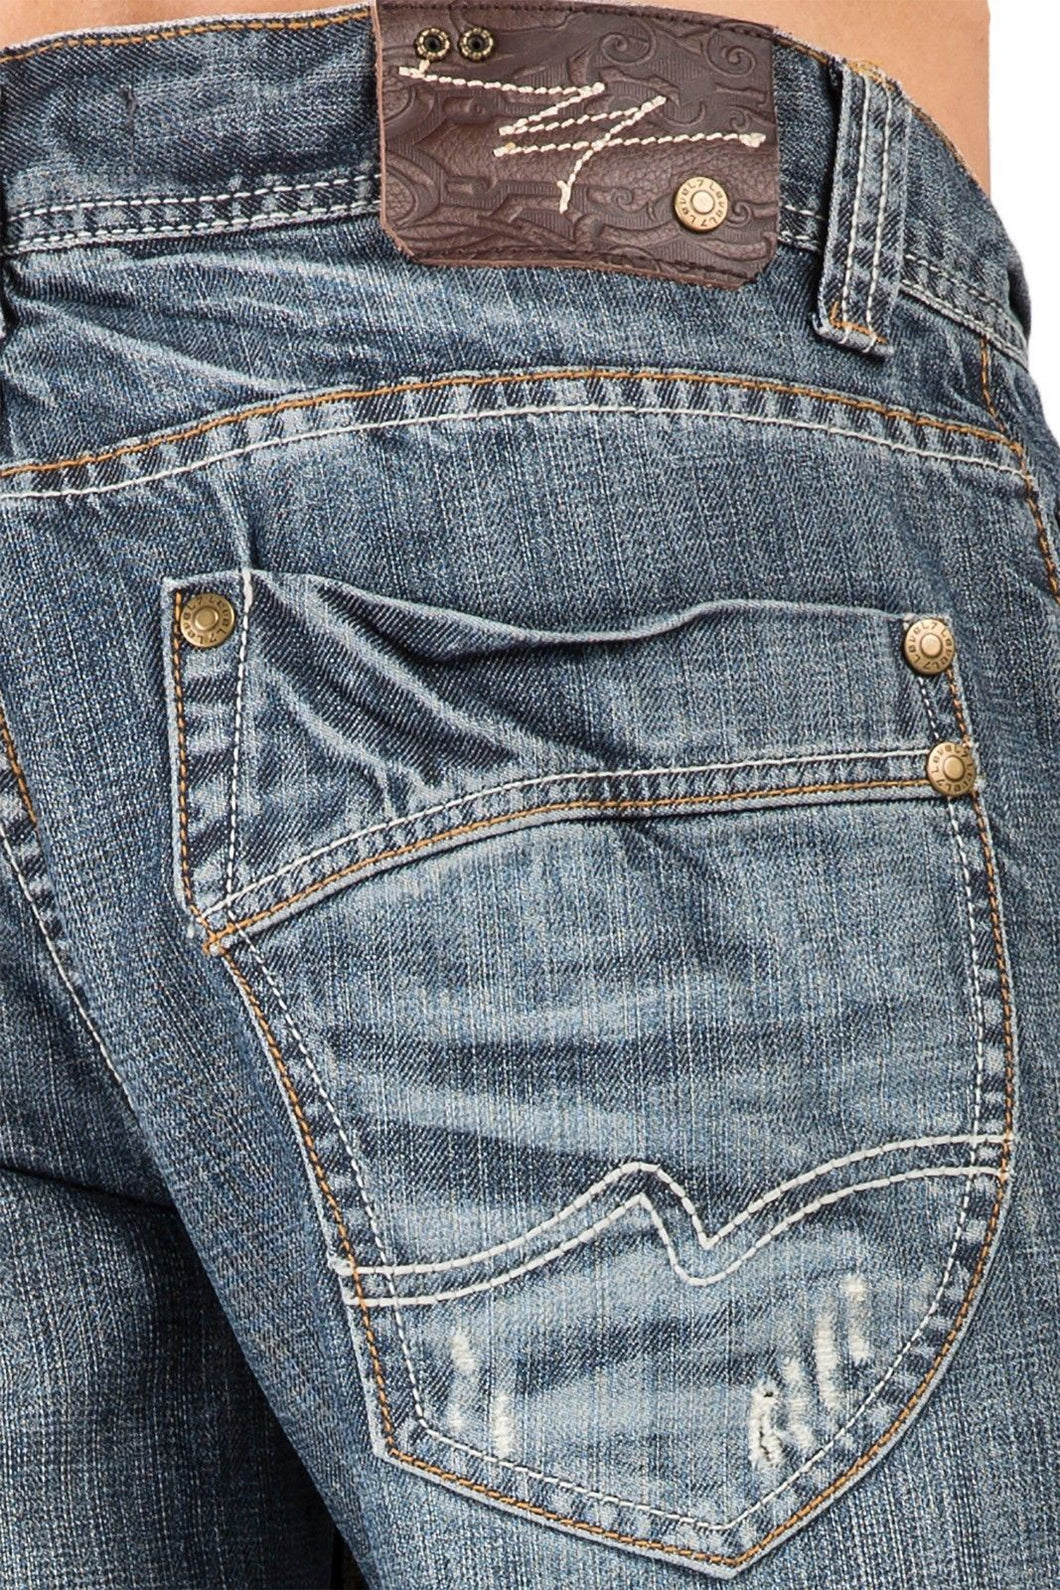 Level 7 Men's Relaxed Straight Whiskering Distressed Medium Blue Jean ...